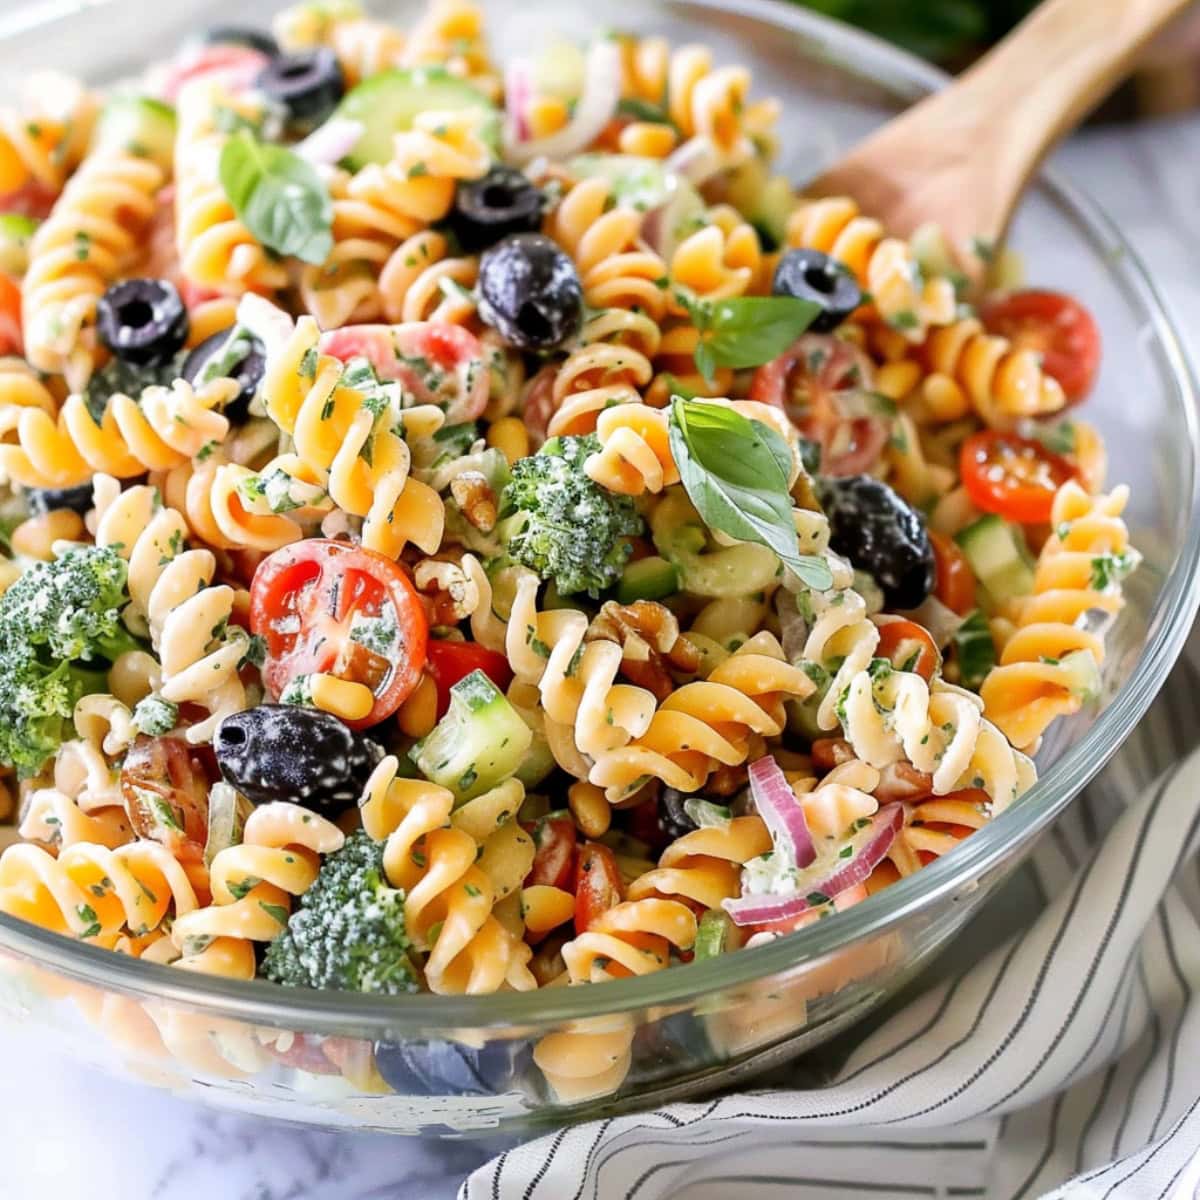 Tri color pasta salad with with fresh herbs, pesto, veggies, cheese and tri color rotini pasta tossed in caesar salad tossed in glass bowl.  
